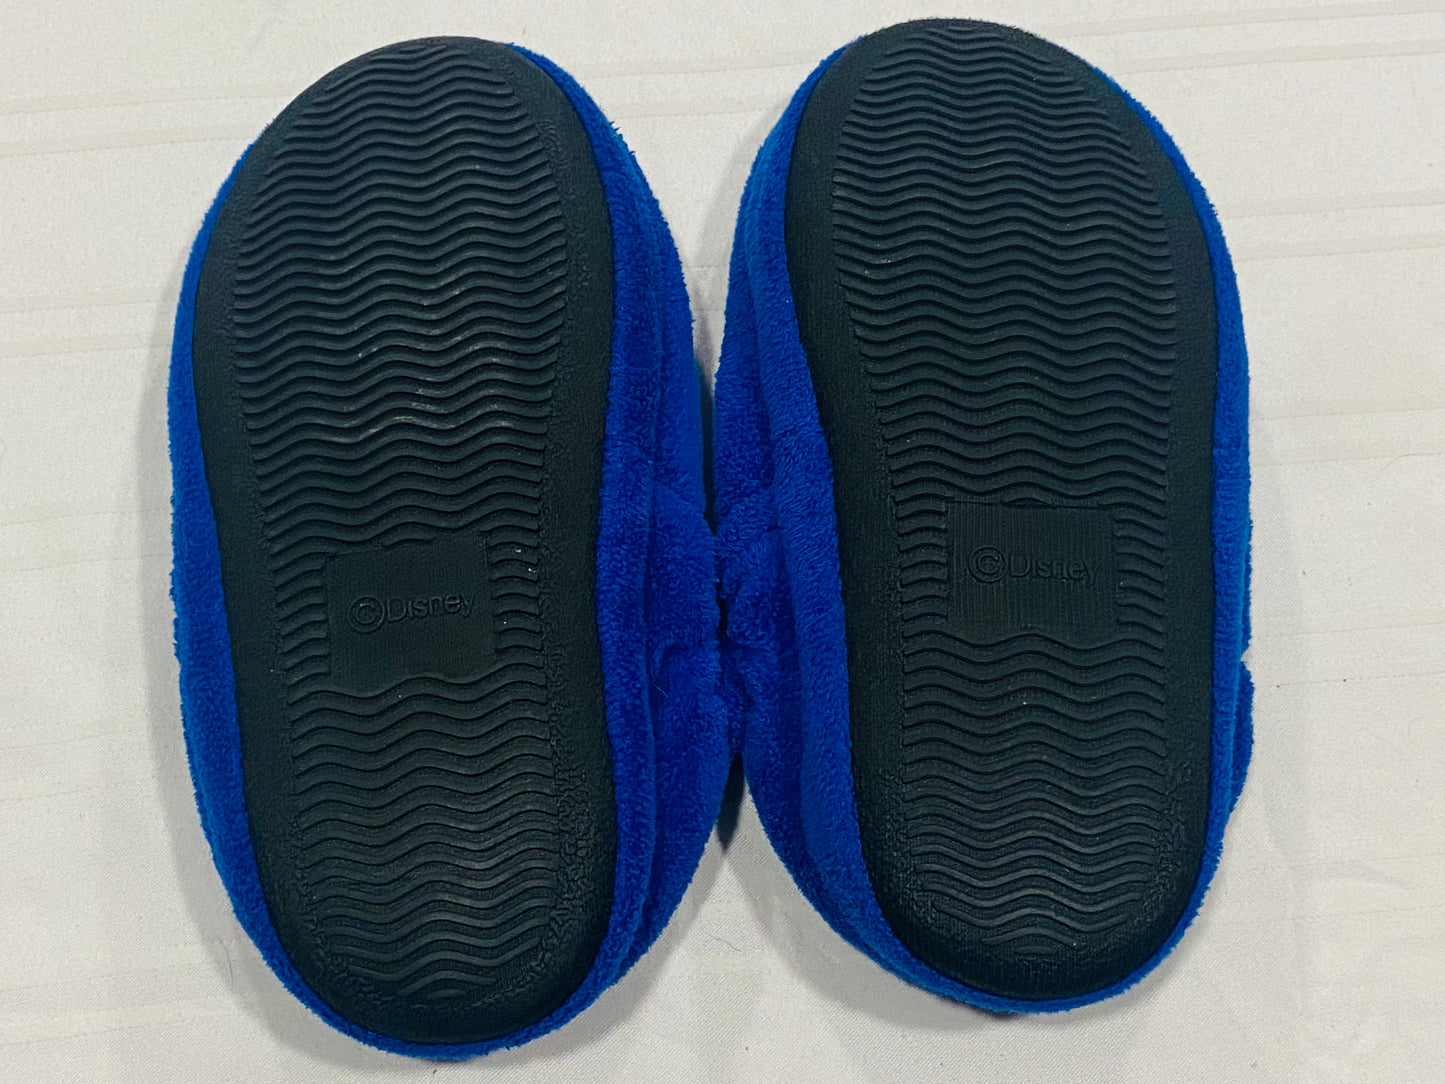 Mickey Slippers with Hard Soles - size 13/1 - EUC